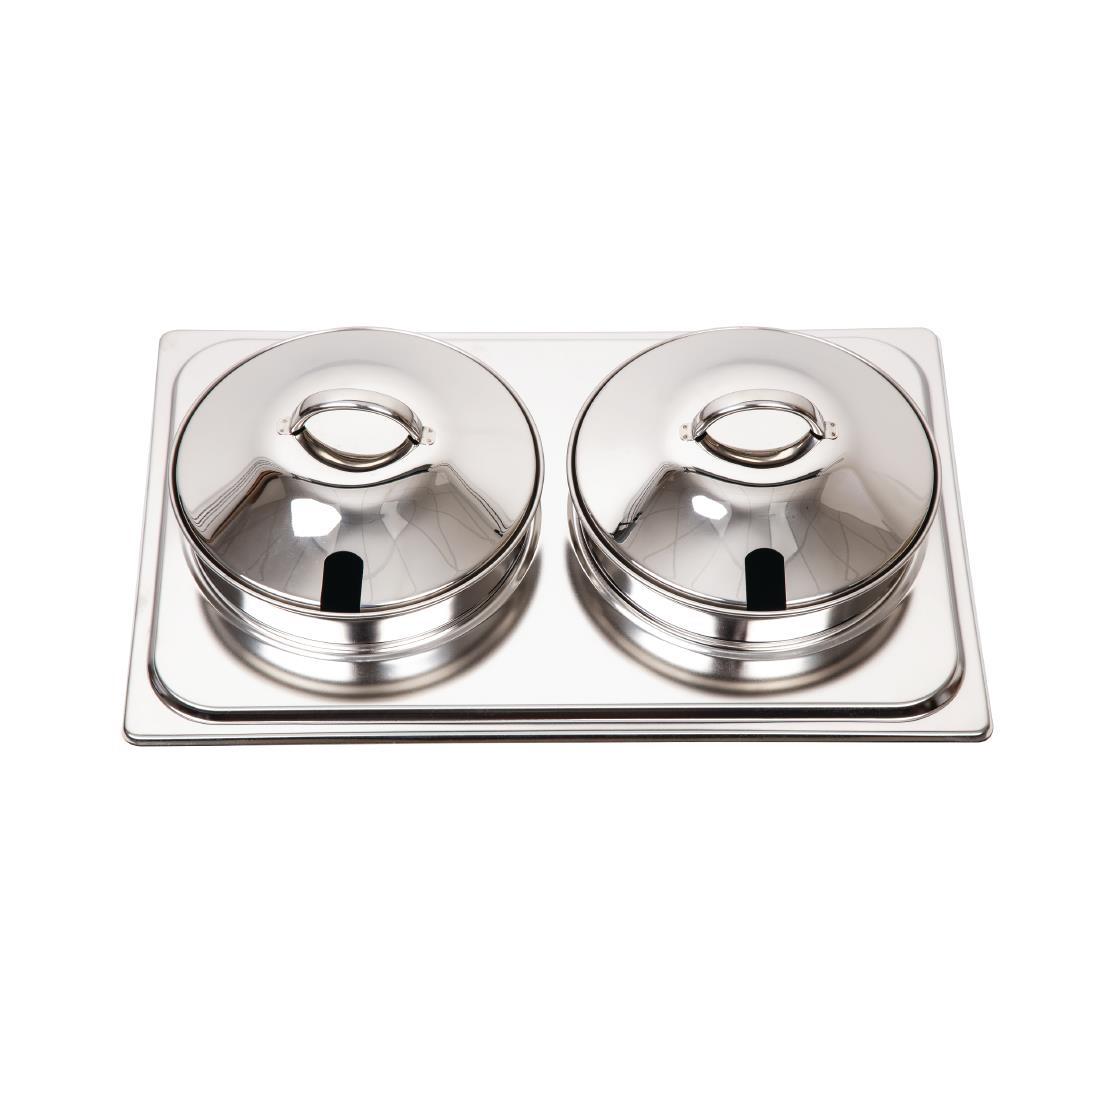 Bain Marie Set for Chafing Dish - CB723  - 1